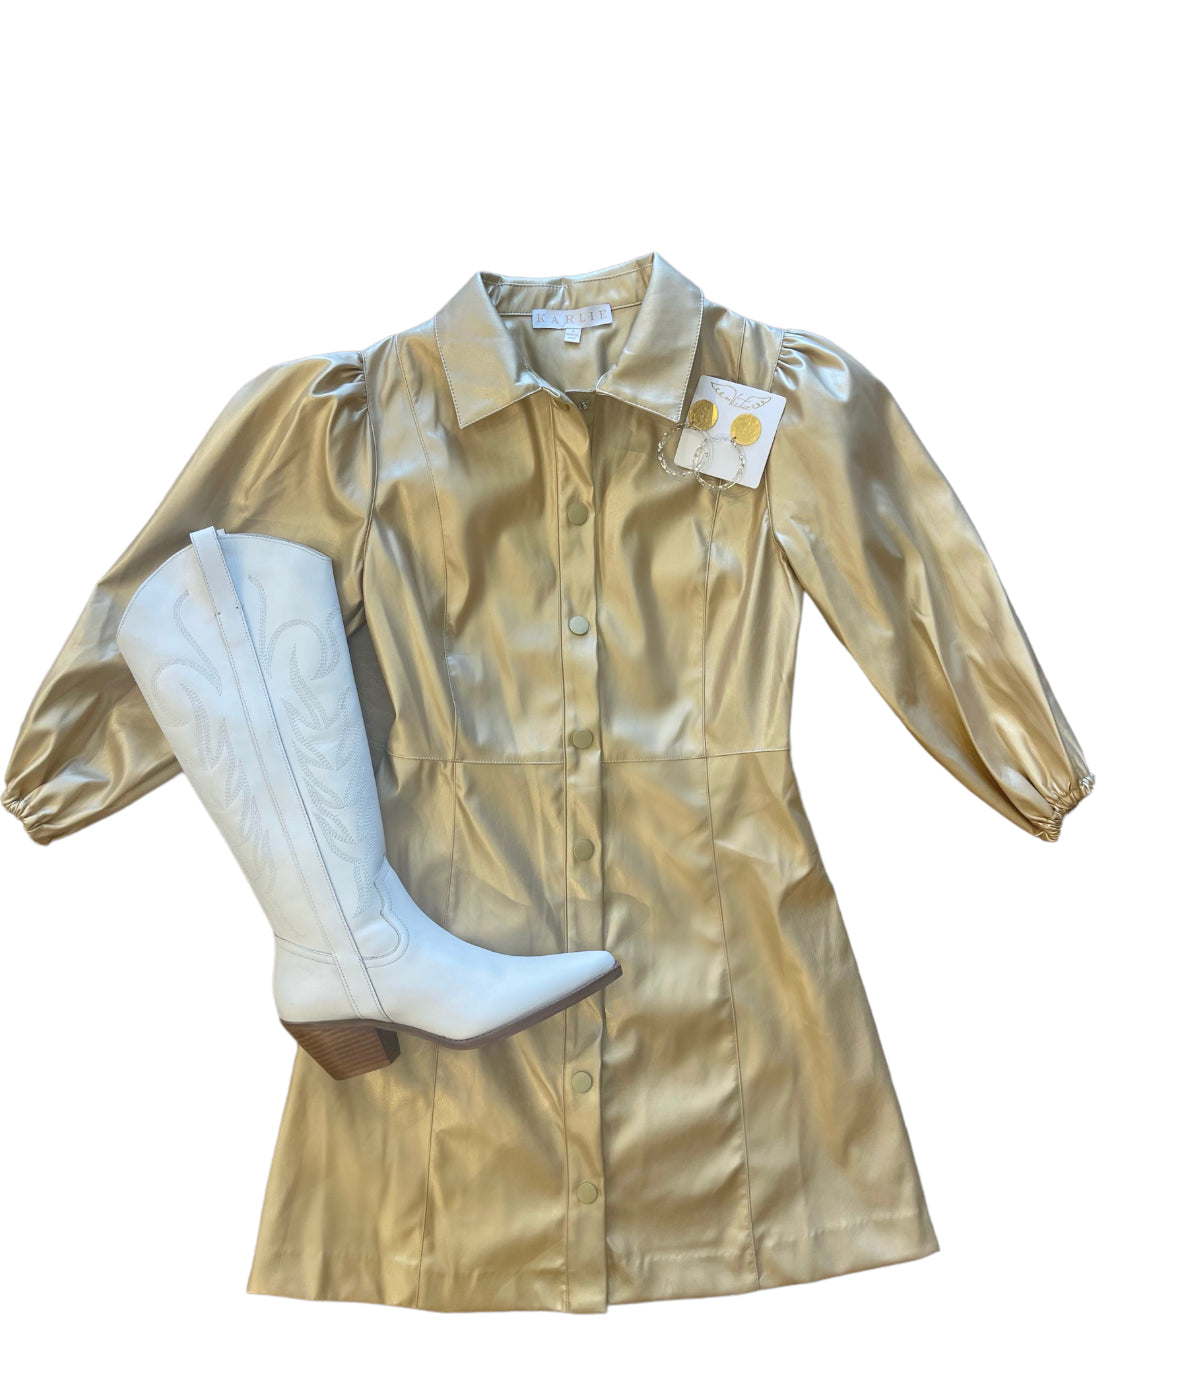 Gold Faux Leather dress